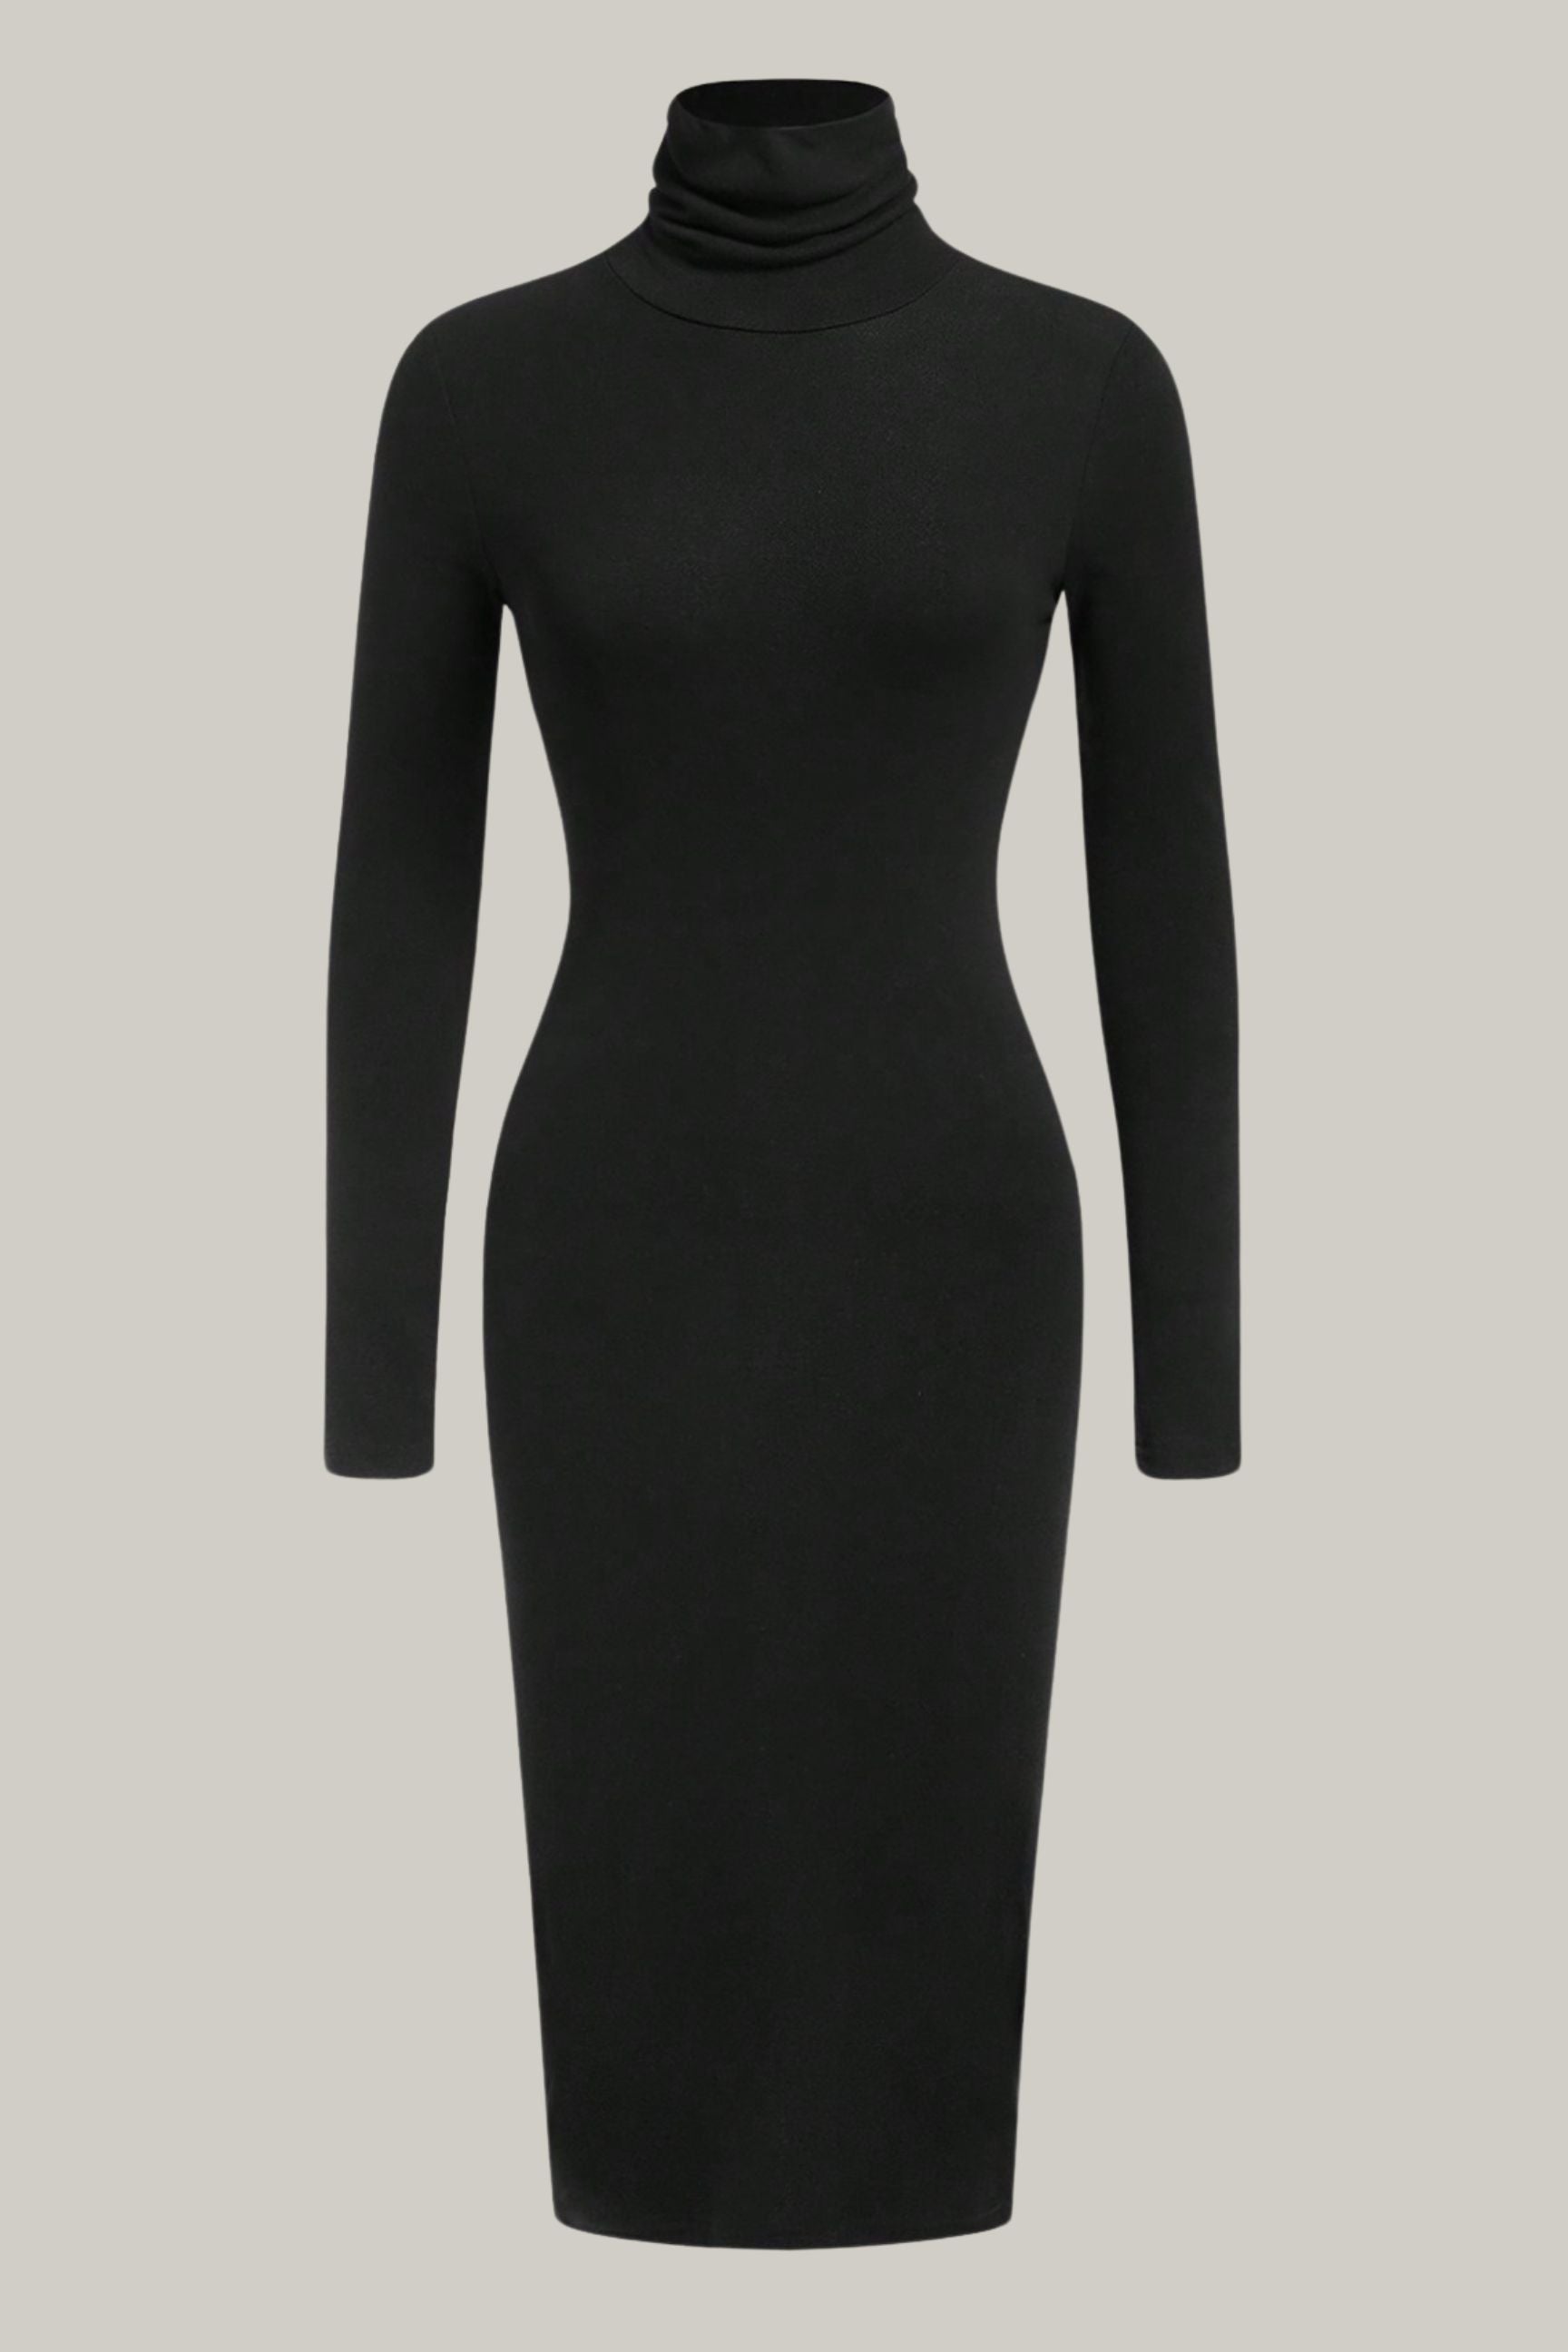 Angelina High Neck Solid Bodycon Dress